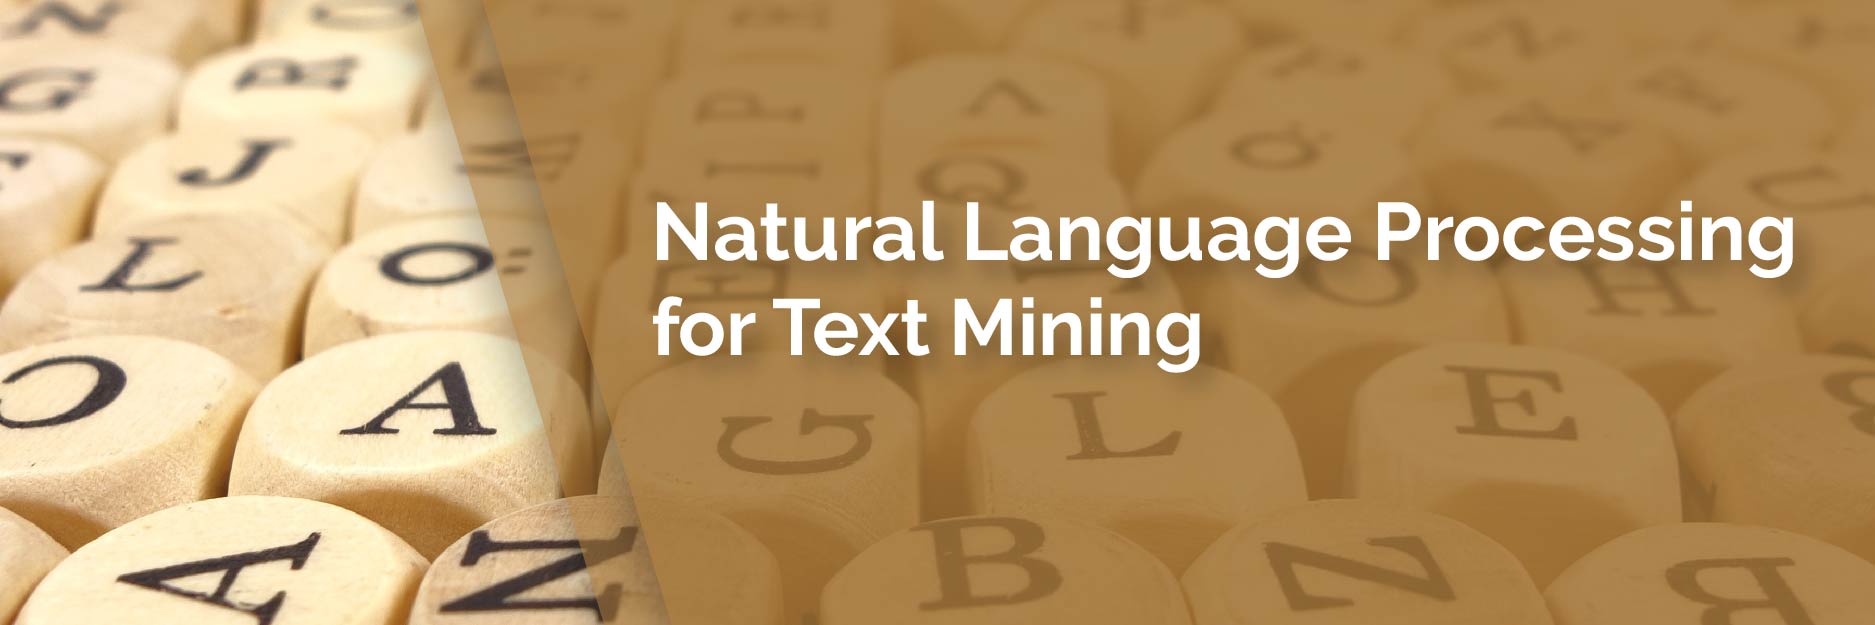 Natural Language Processing for Text Mining-training-in-bangalore-by-zekelabs